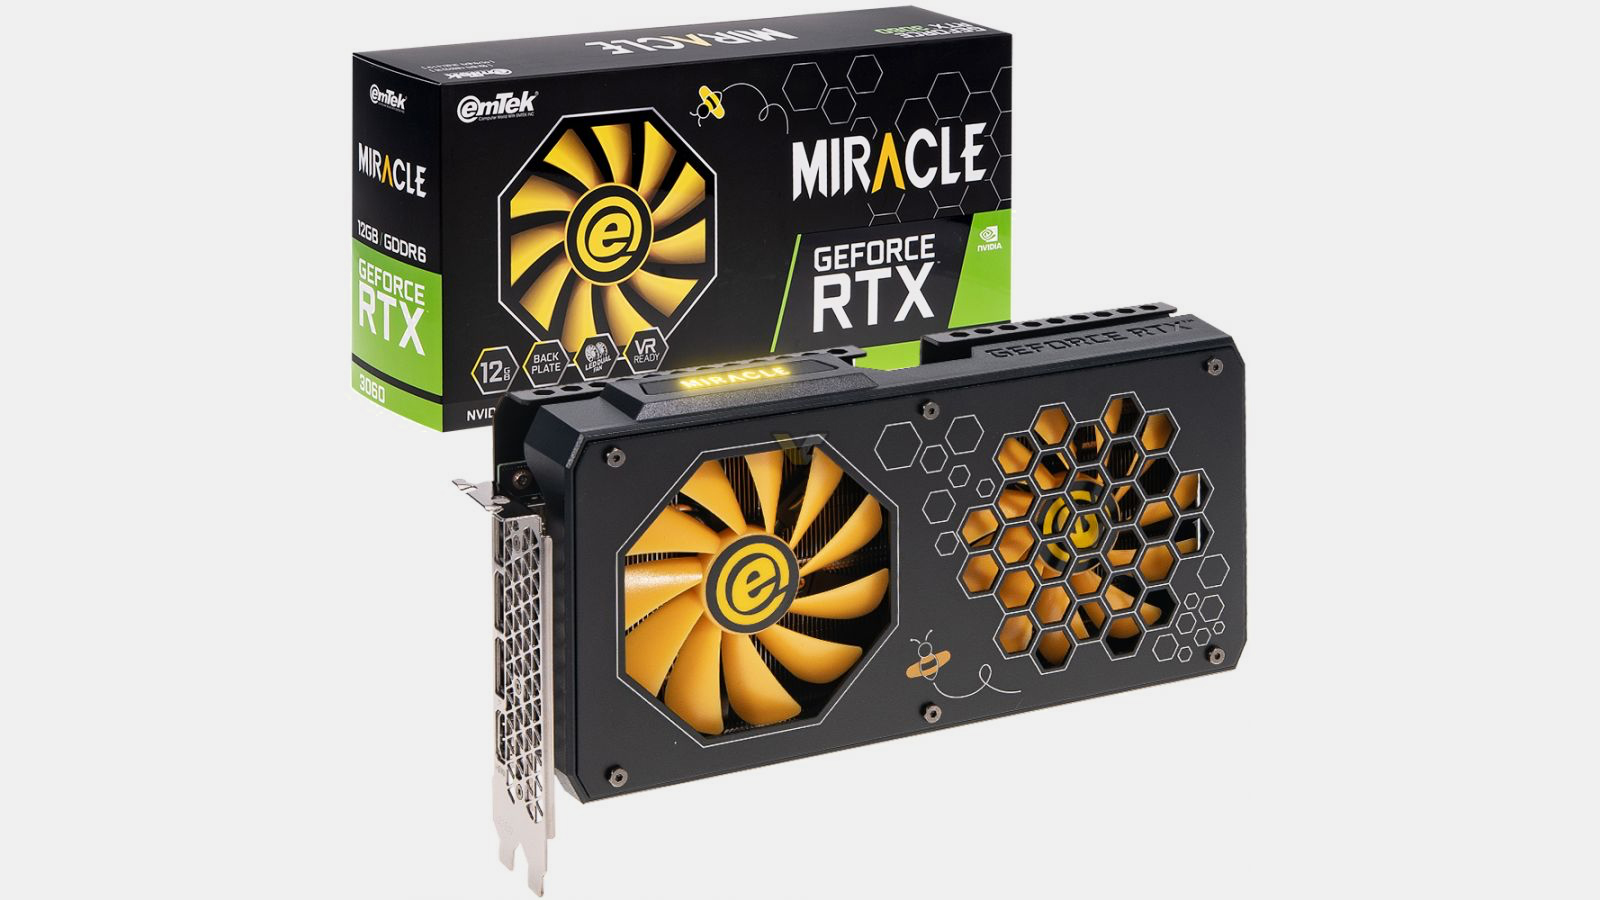 for-the-bees:-emtek-launches-miracle-geforce-rtx-3060-with-honeycombs